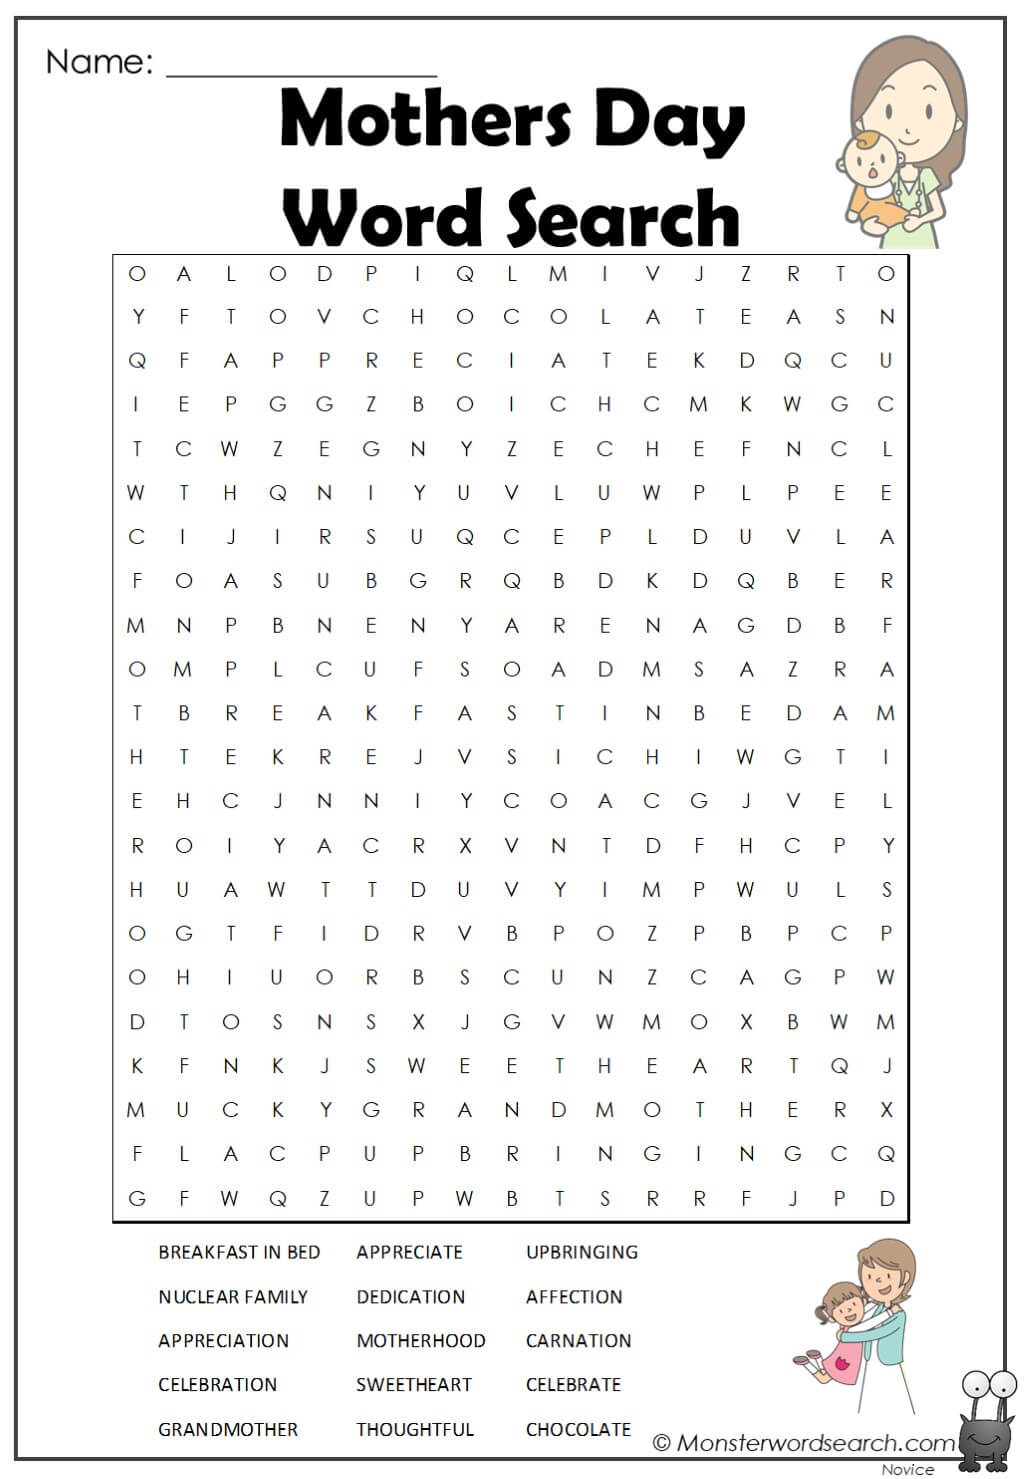 mother-s-day-word-search-puzzle-worksheet-activity-by-puzzles-to-print